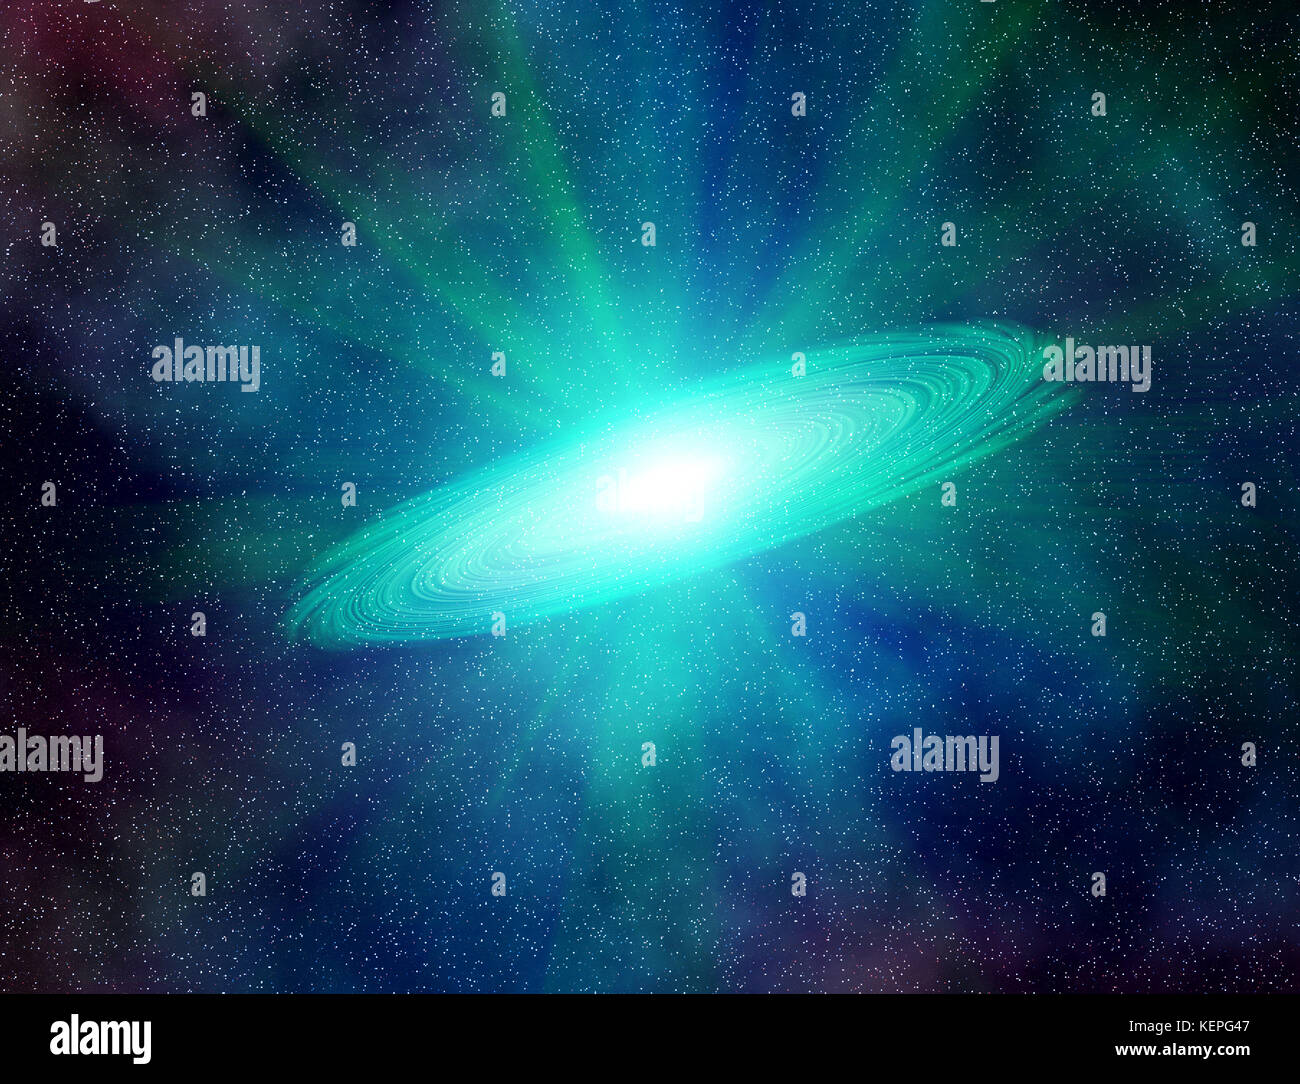 Abstract space universe astronomy illustration background: supernova explosion in the active galaxy center. Stock Photo